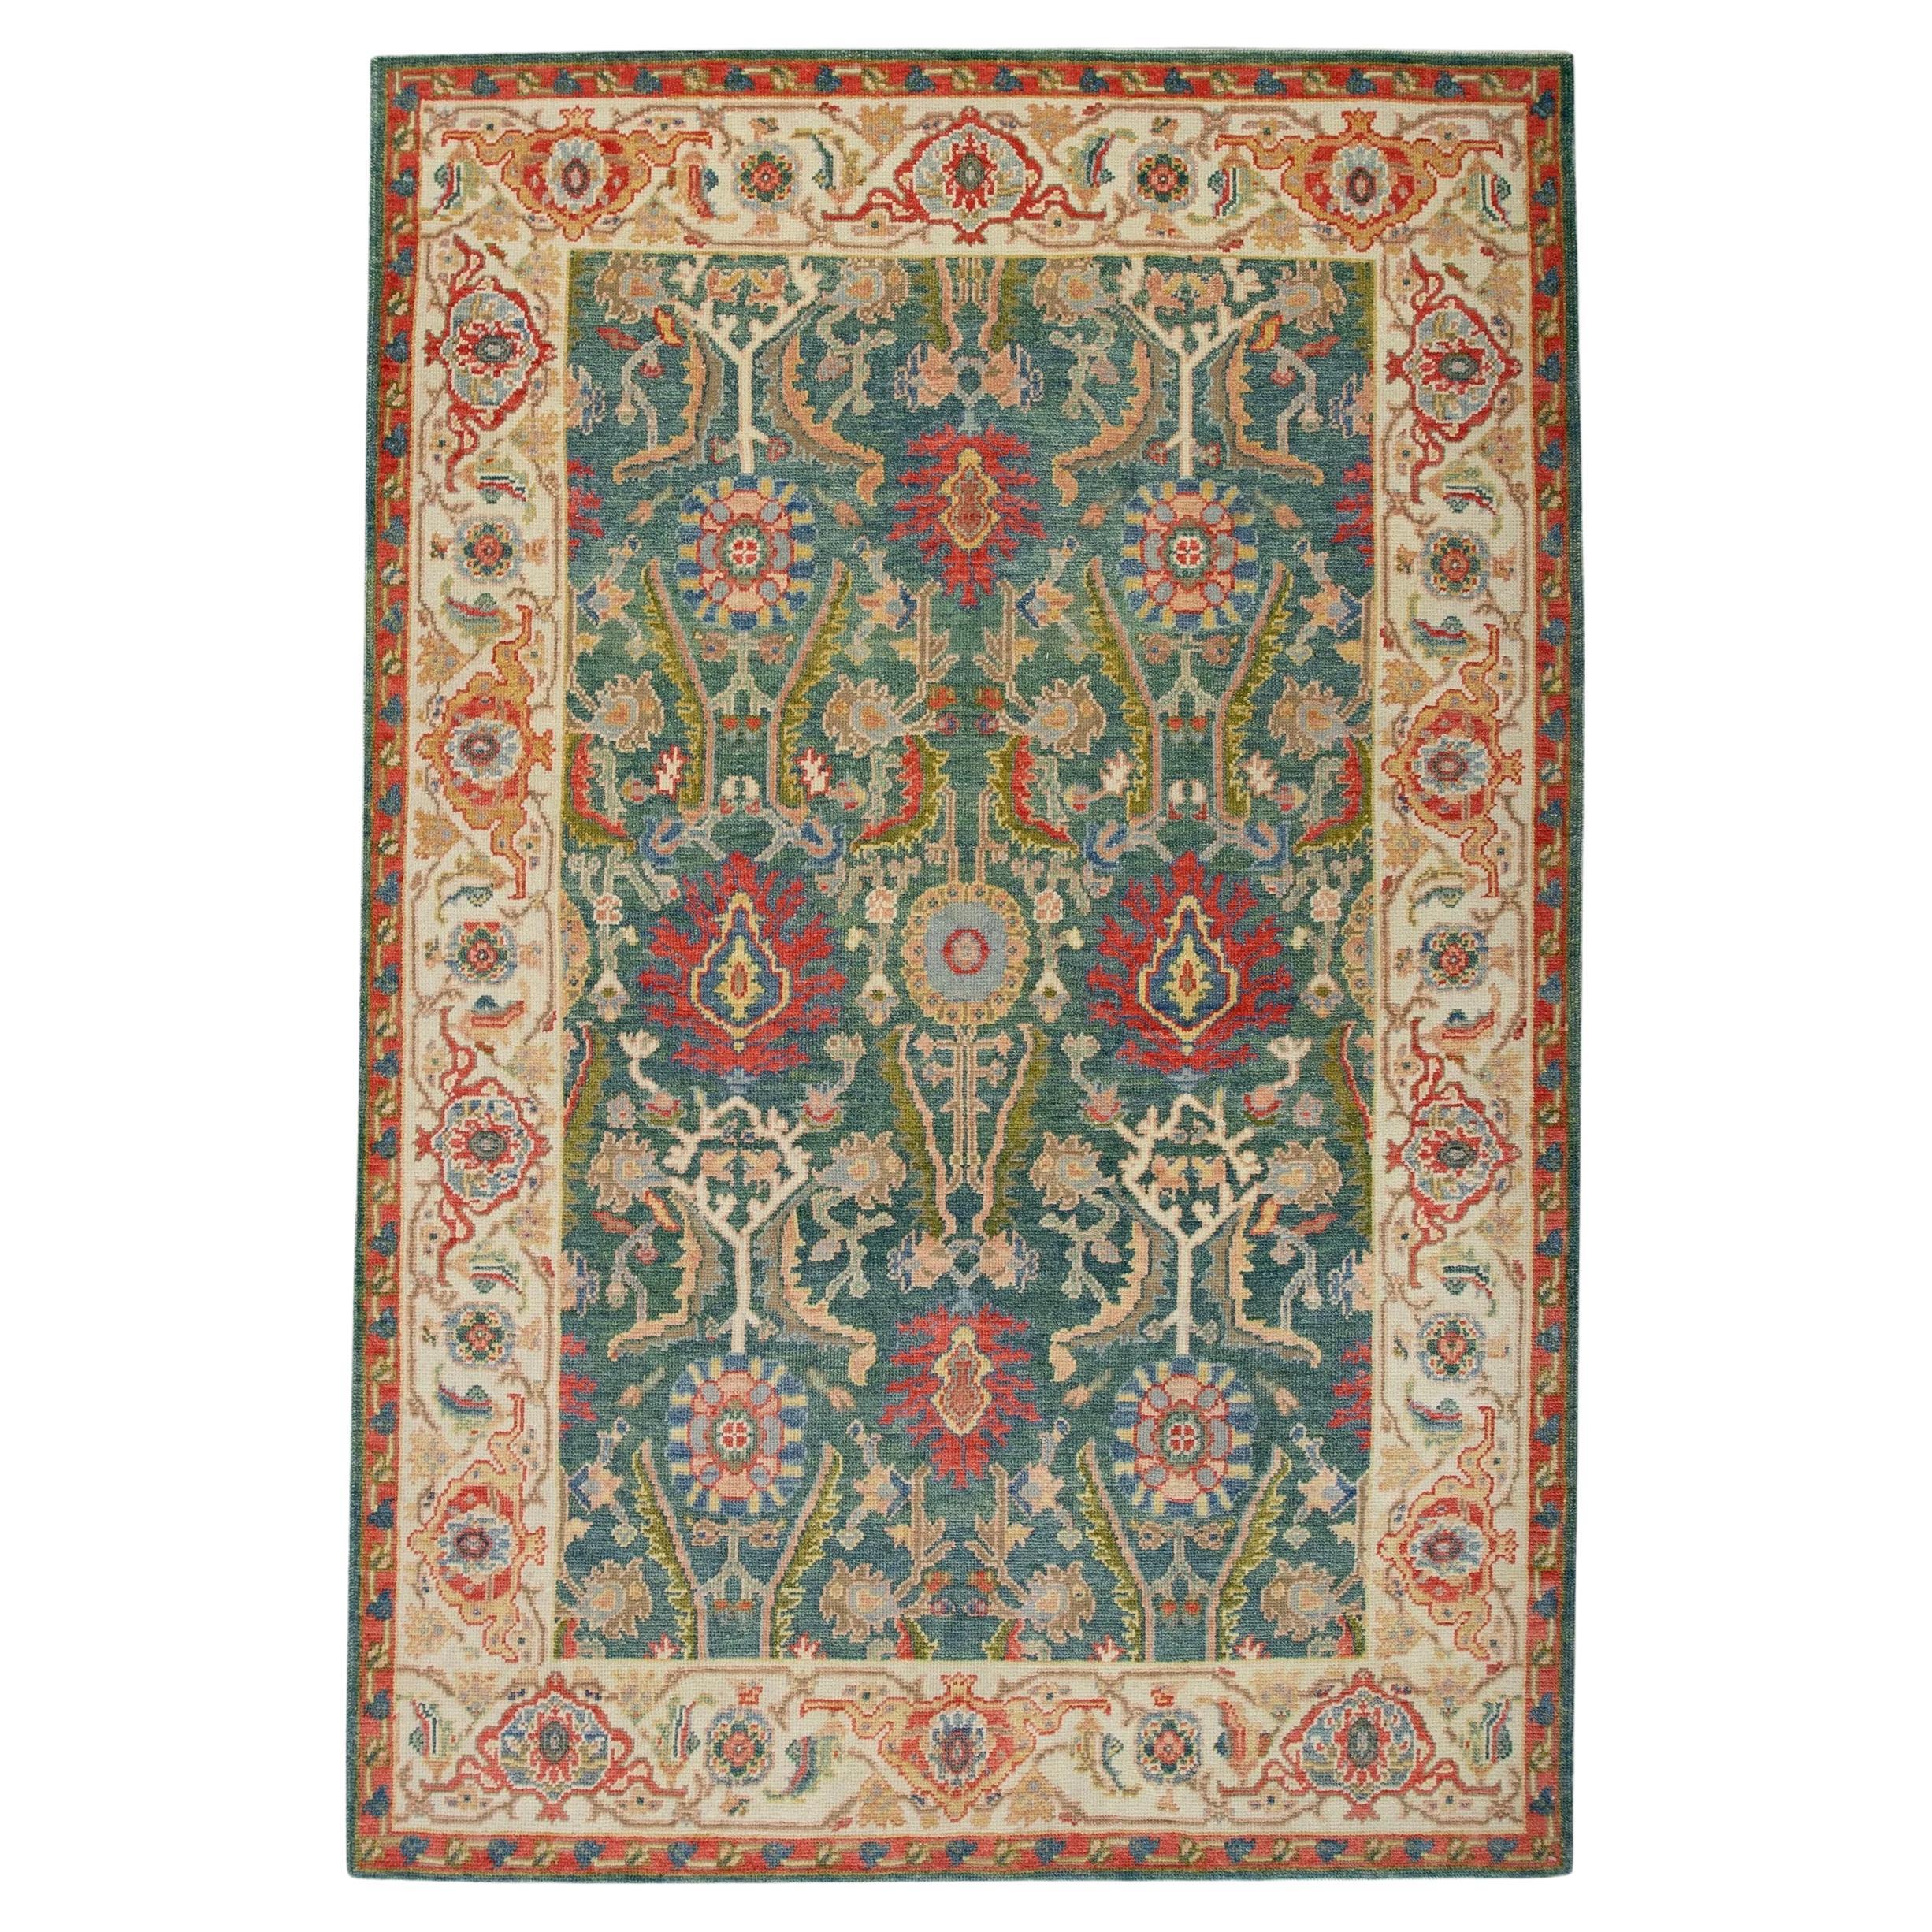 Green & Red Floral Design Handwoven Wool Turkish Finewoven Oushak Rug 4'3 x 6'7 For Sale